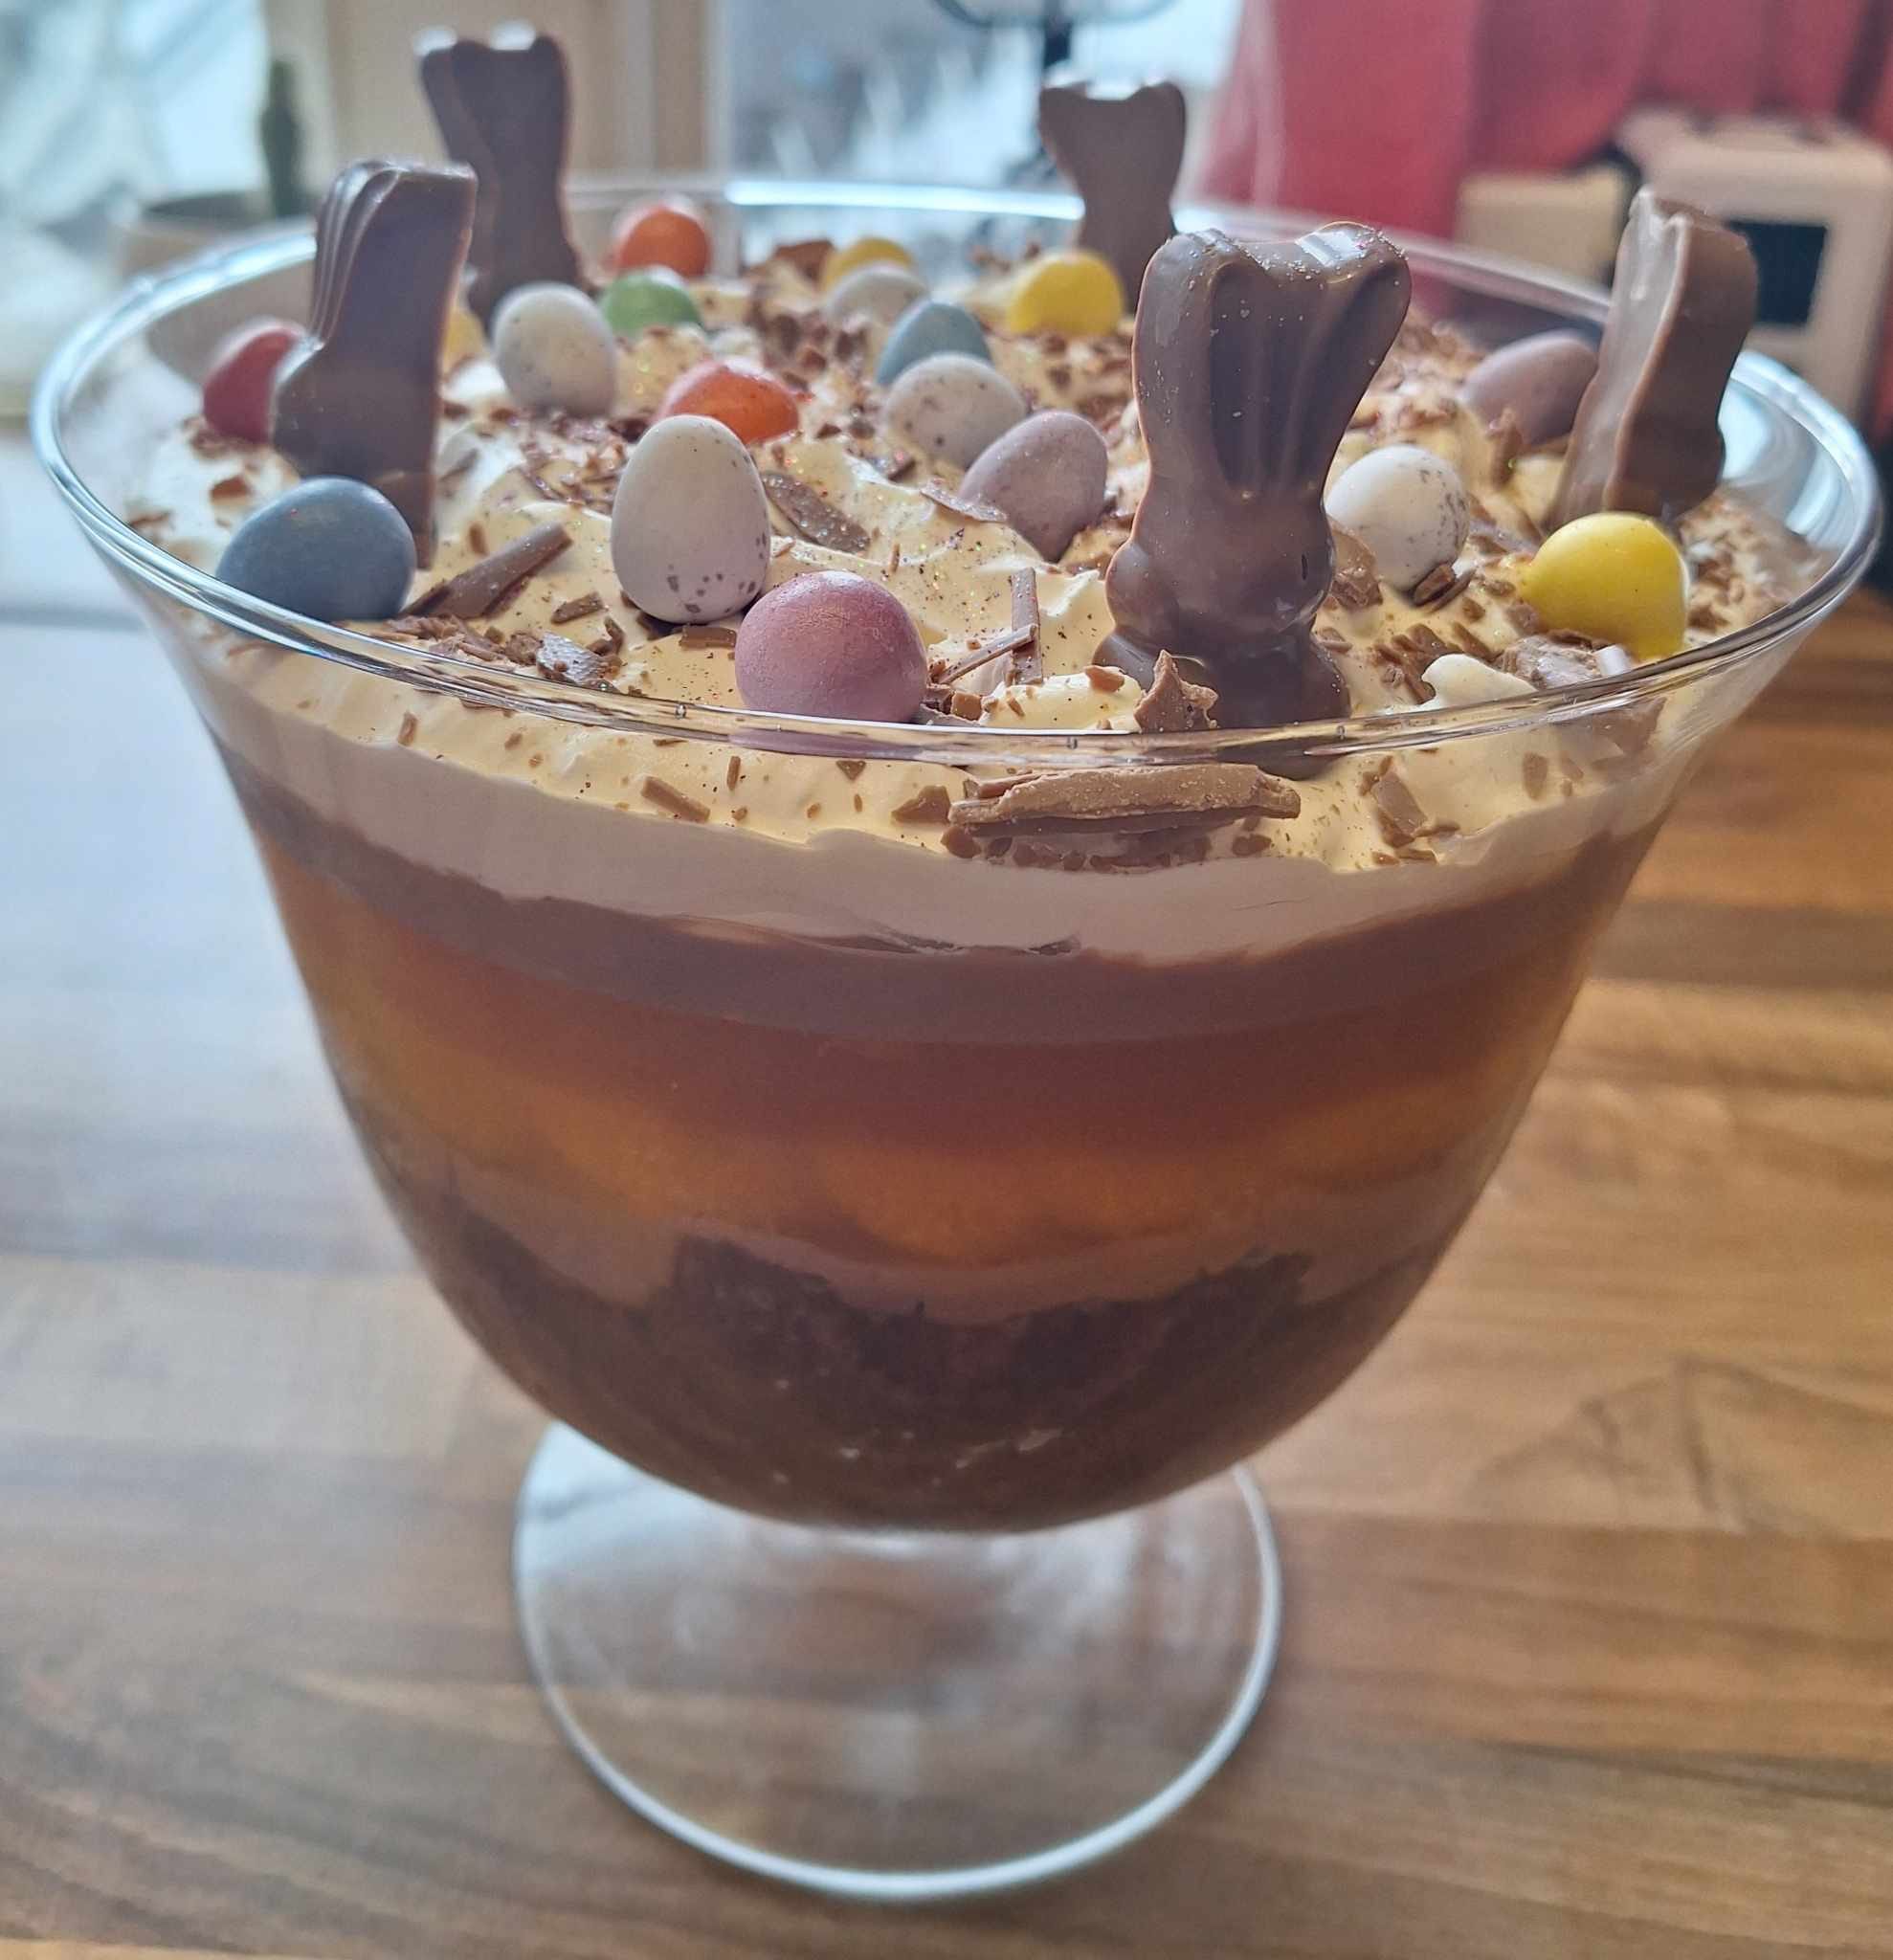 A delicious Chocolate Orange Trifle with layers of chocolate cake, orange-flavoured custard, and whipped cream.